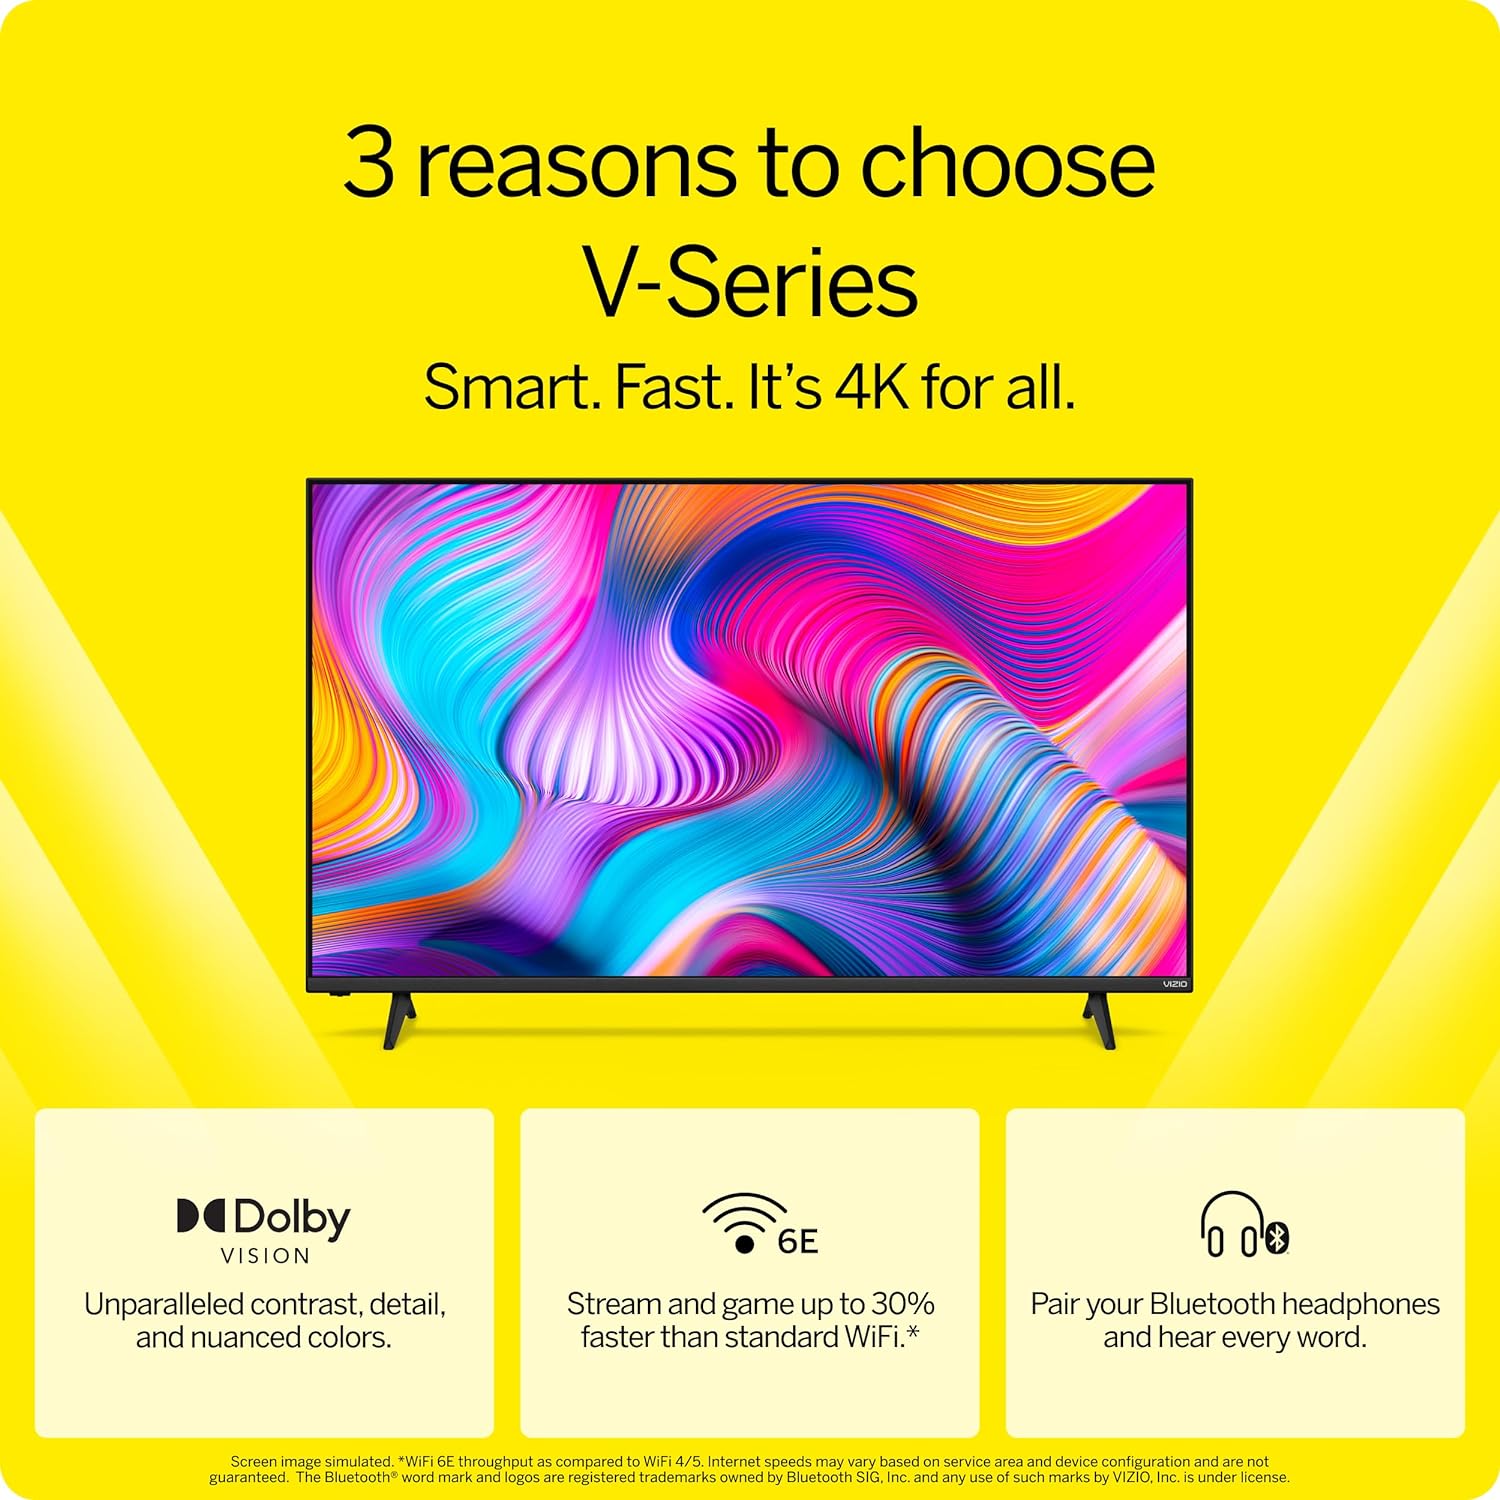 Vizio V-Series 43" 4K LED Dolby Vision HDR Smart TV with Wifi Built-In - Certified Refurbished